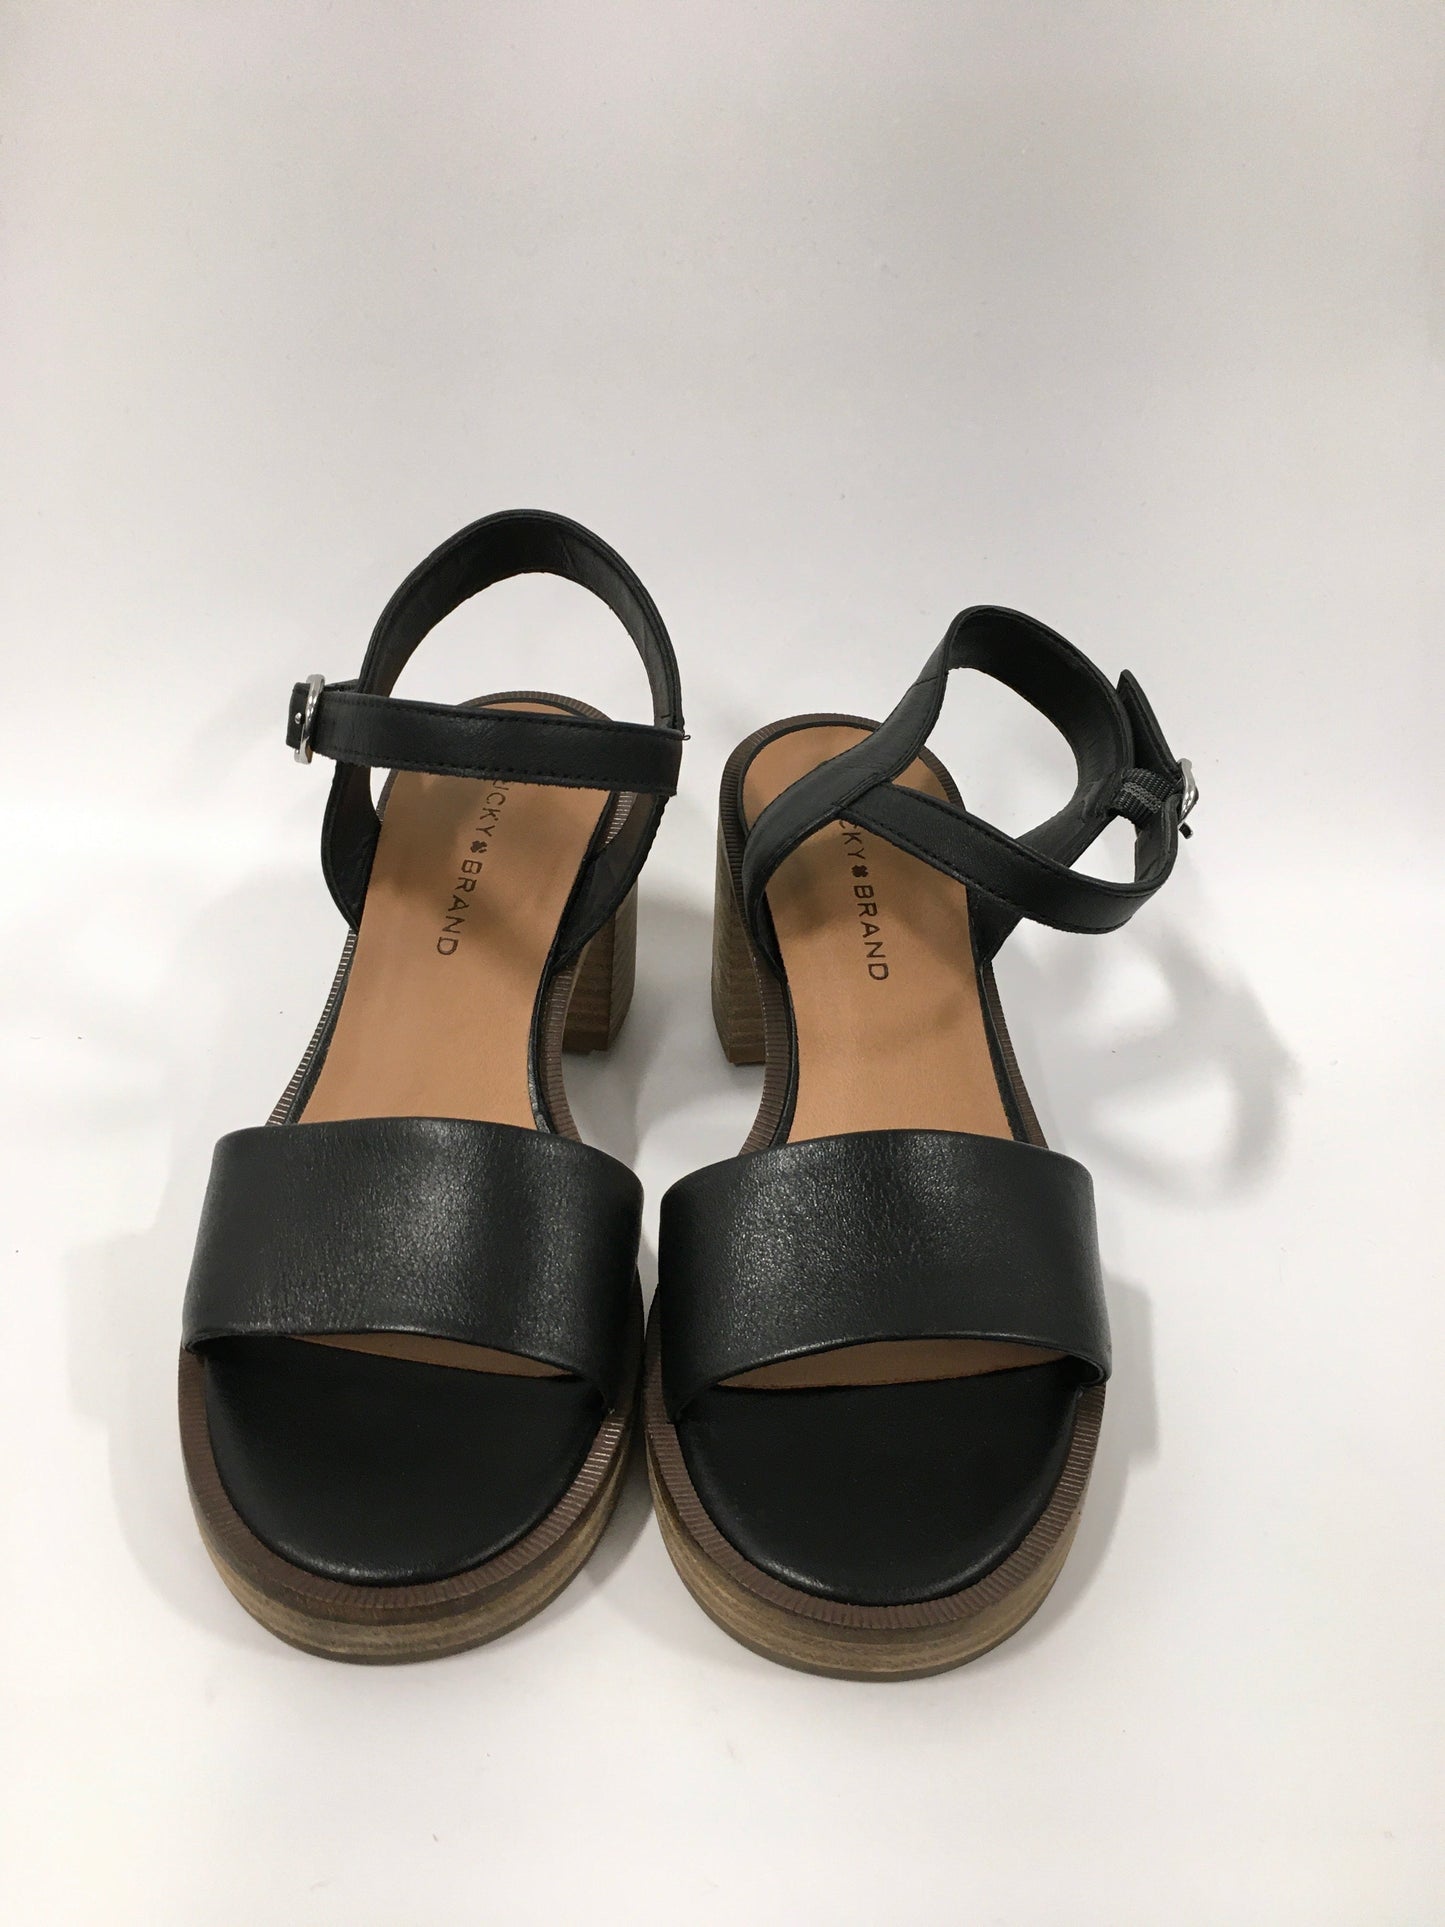 Black Shoes Heels Block Lucky Brand, Size 7